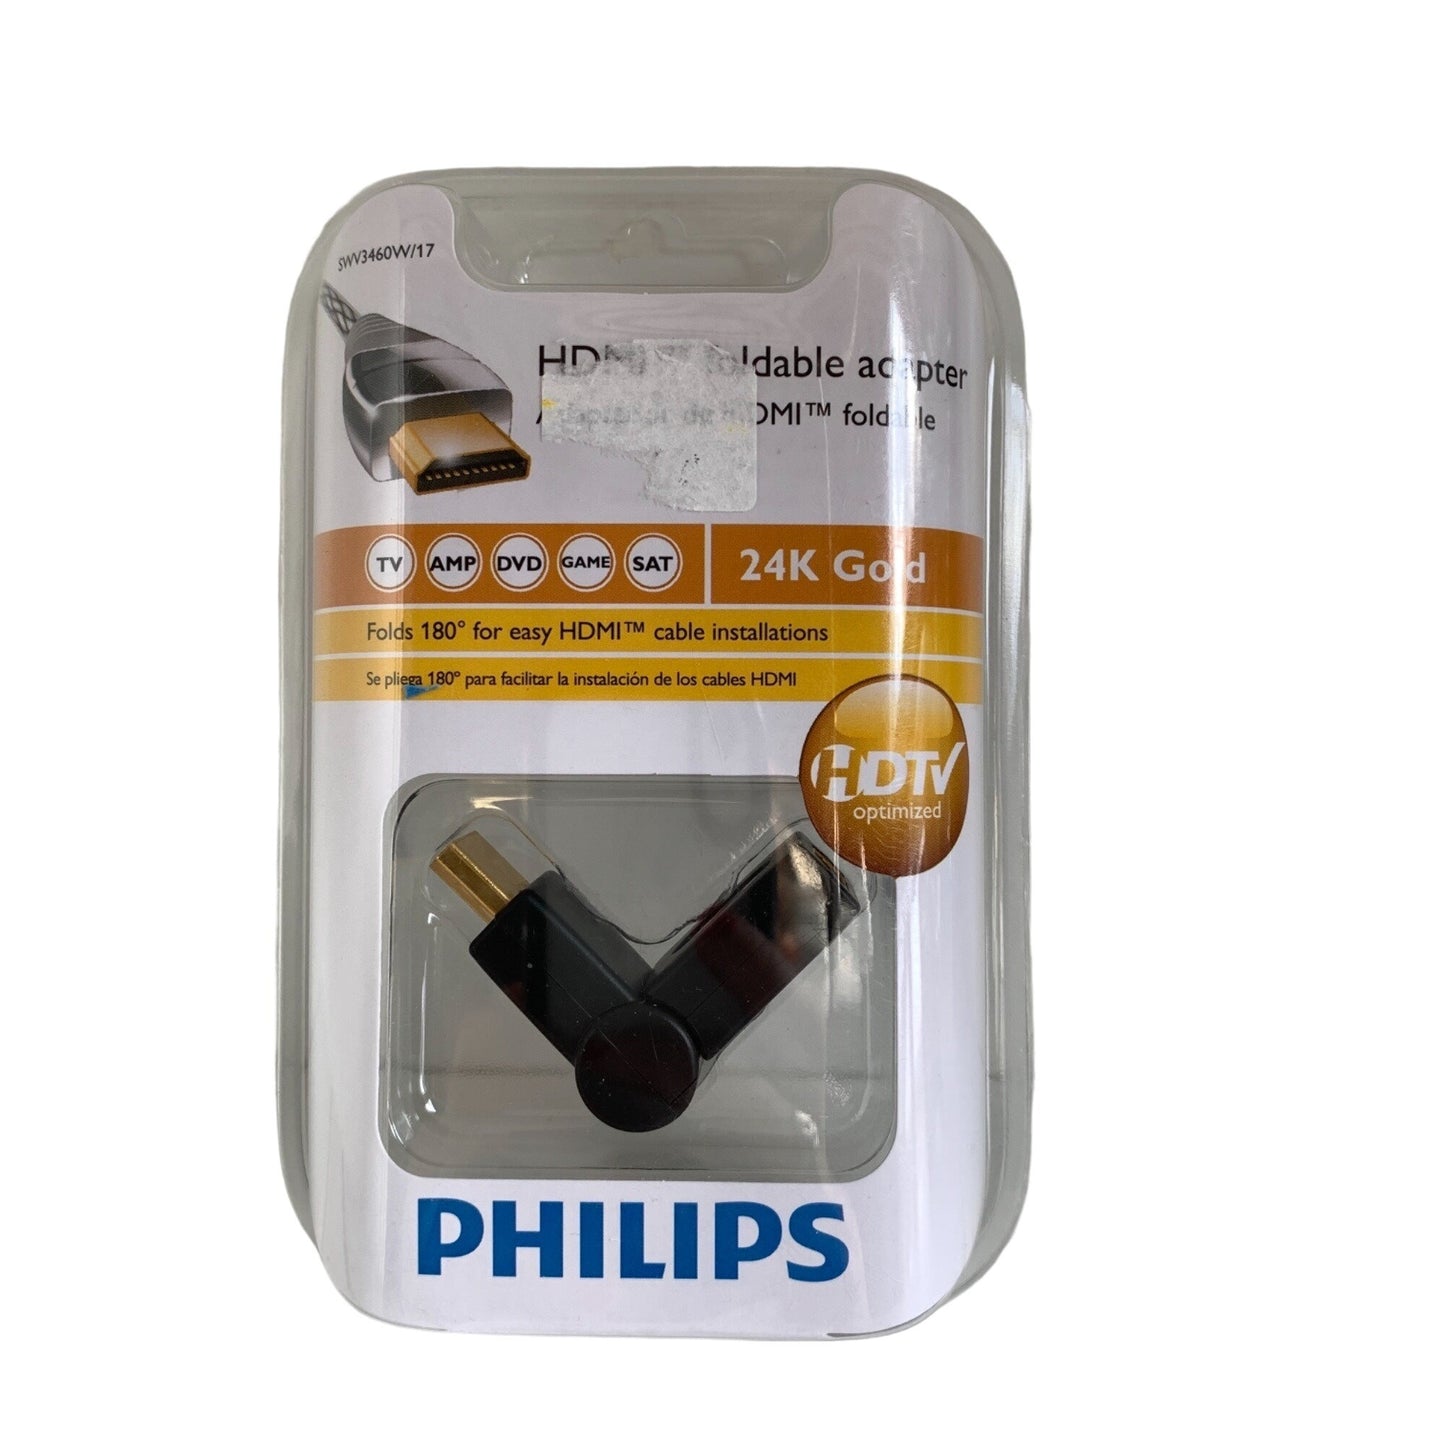 Philips HDMI Foldable Adapter 24K Gold NEW